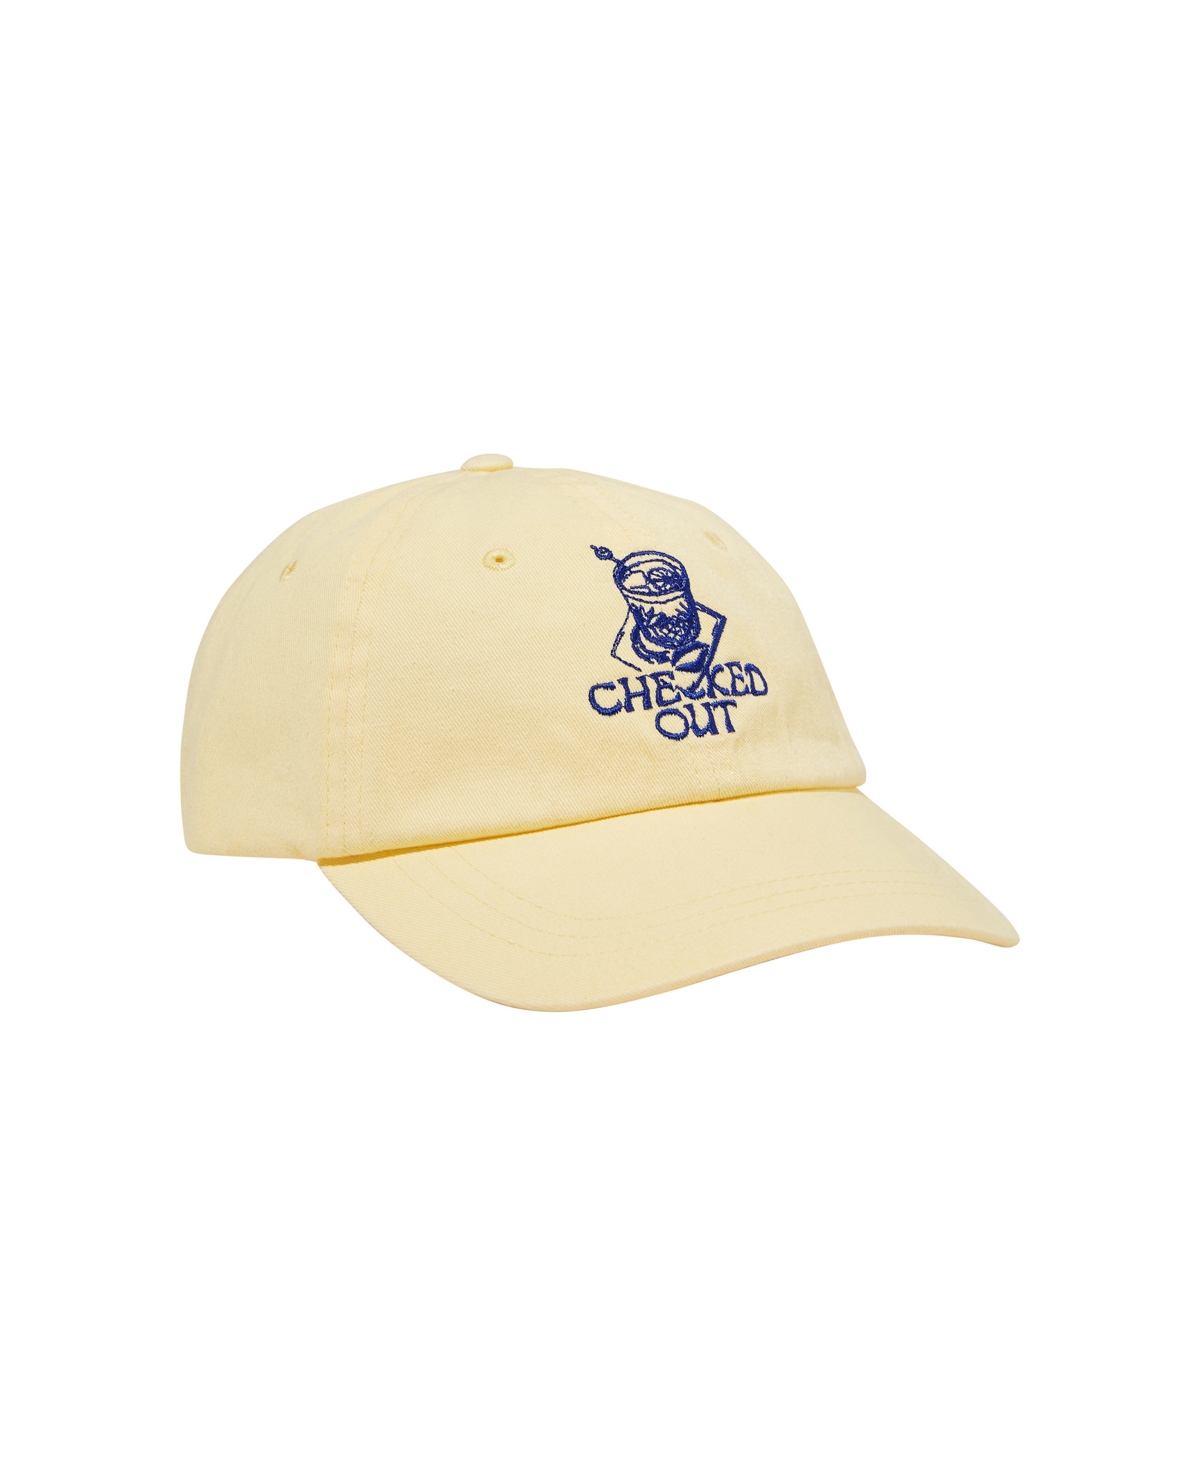 Men's Strap Back Dad Hat - Yellow